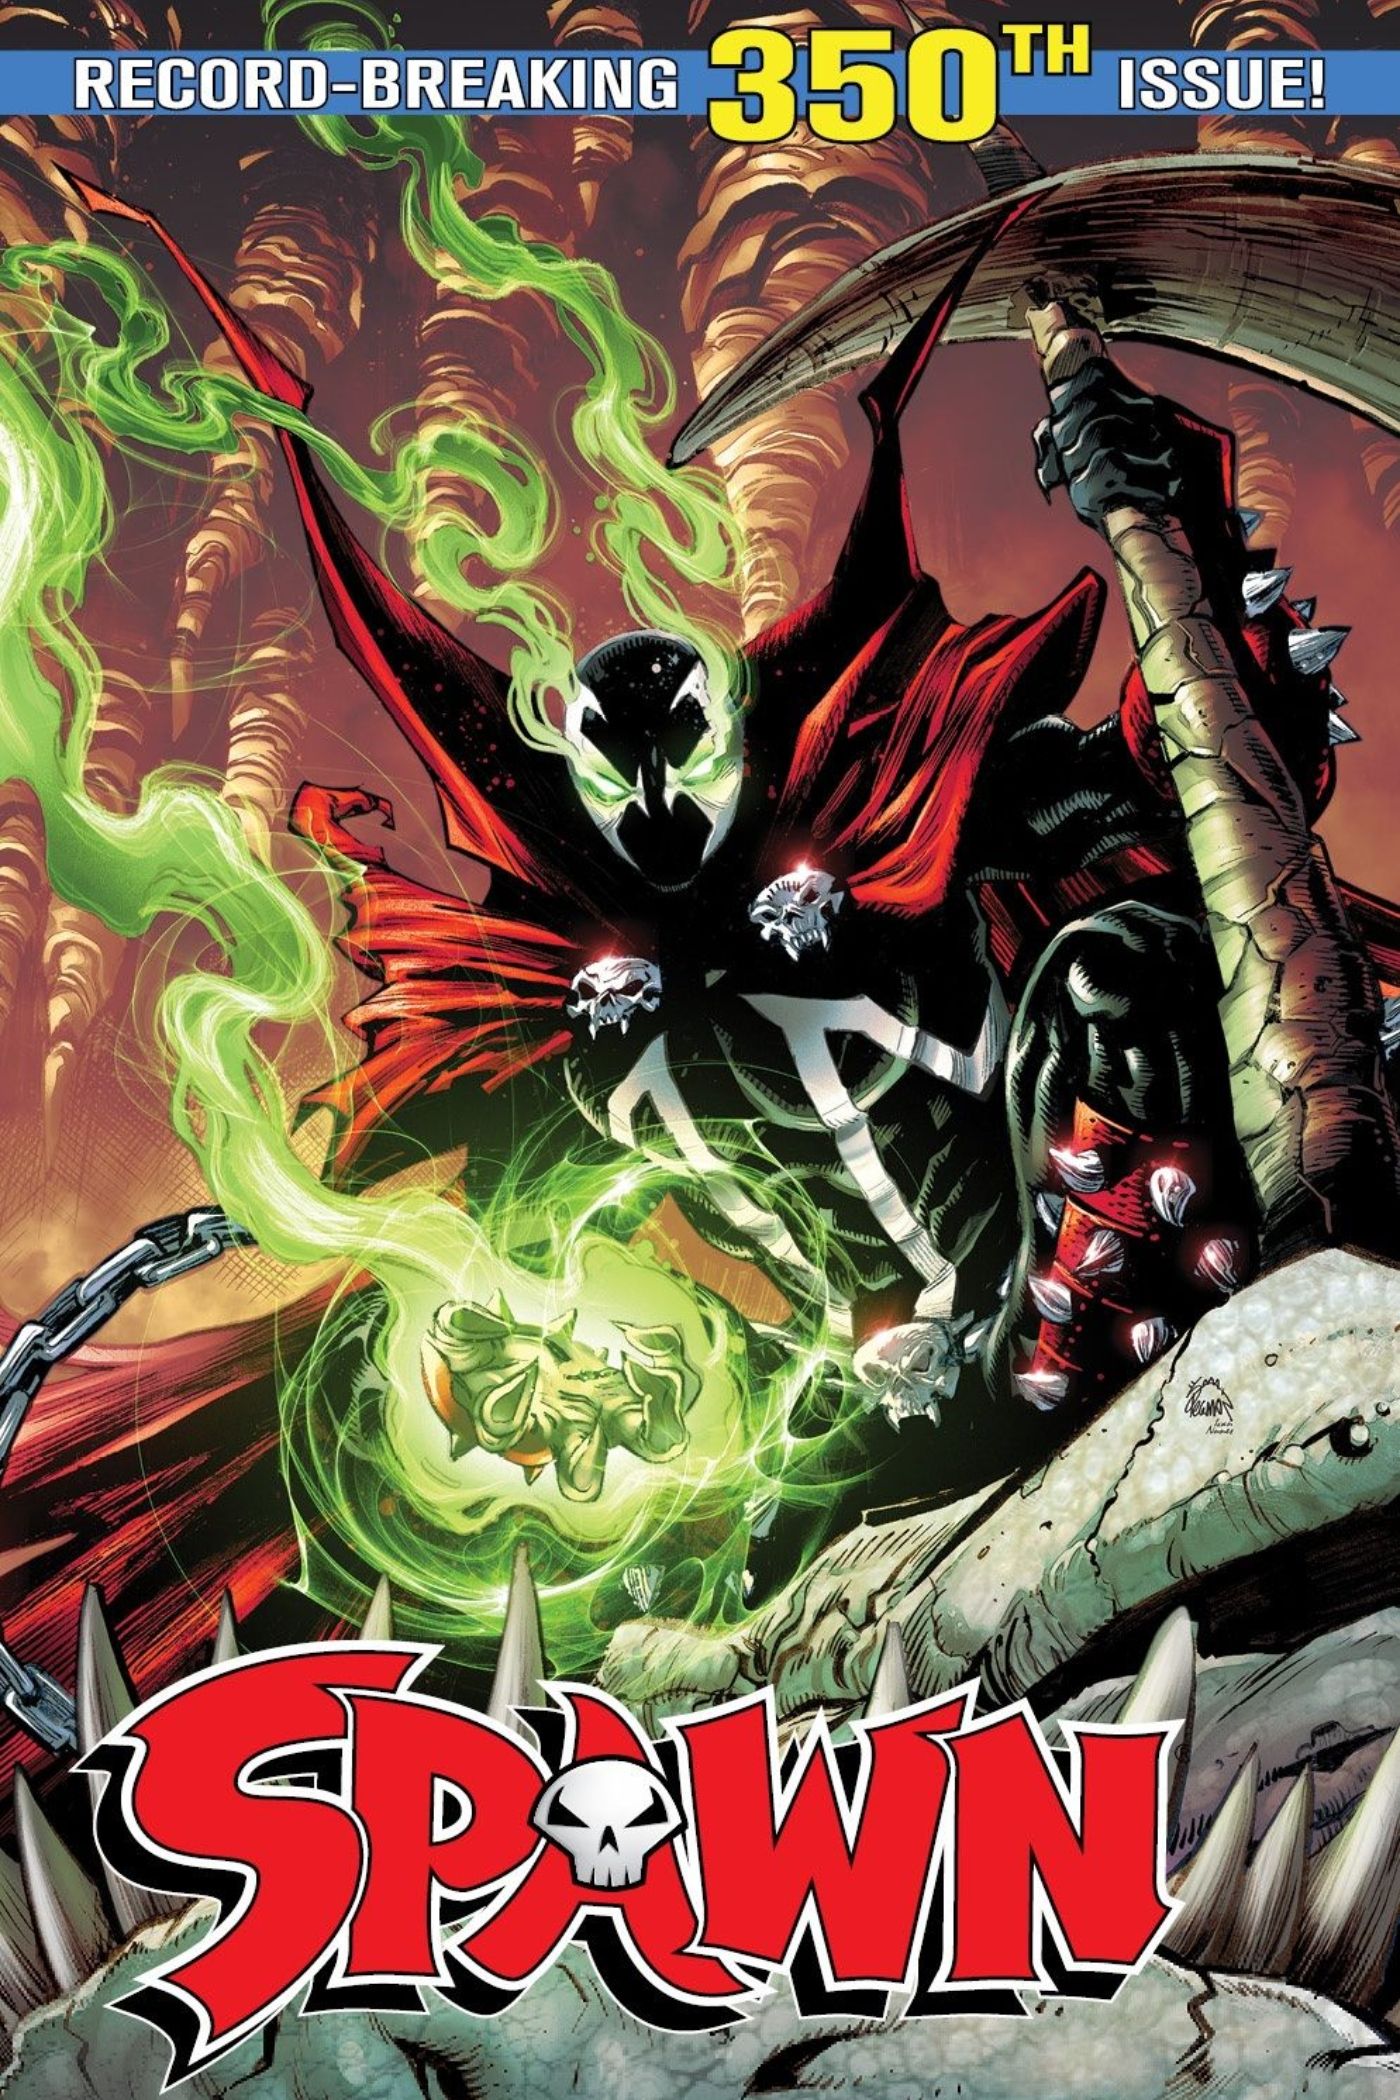 Spawn #350 variant cover featuring Spawn surging with power.